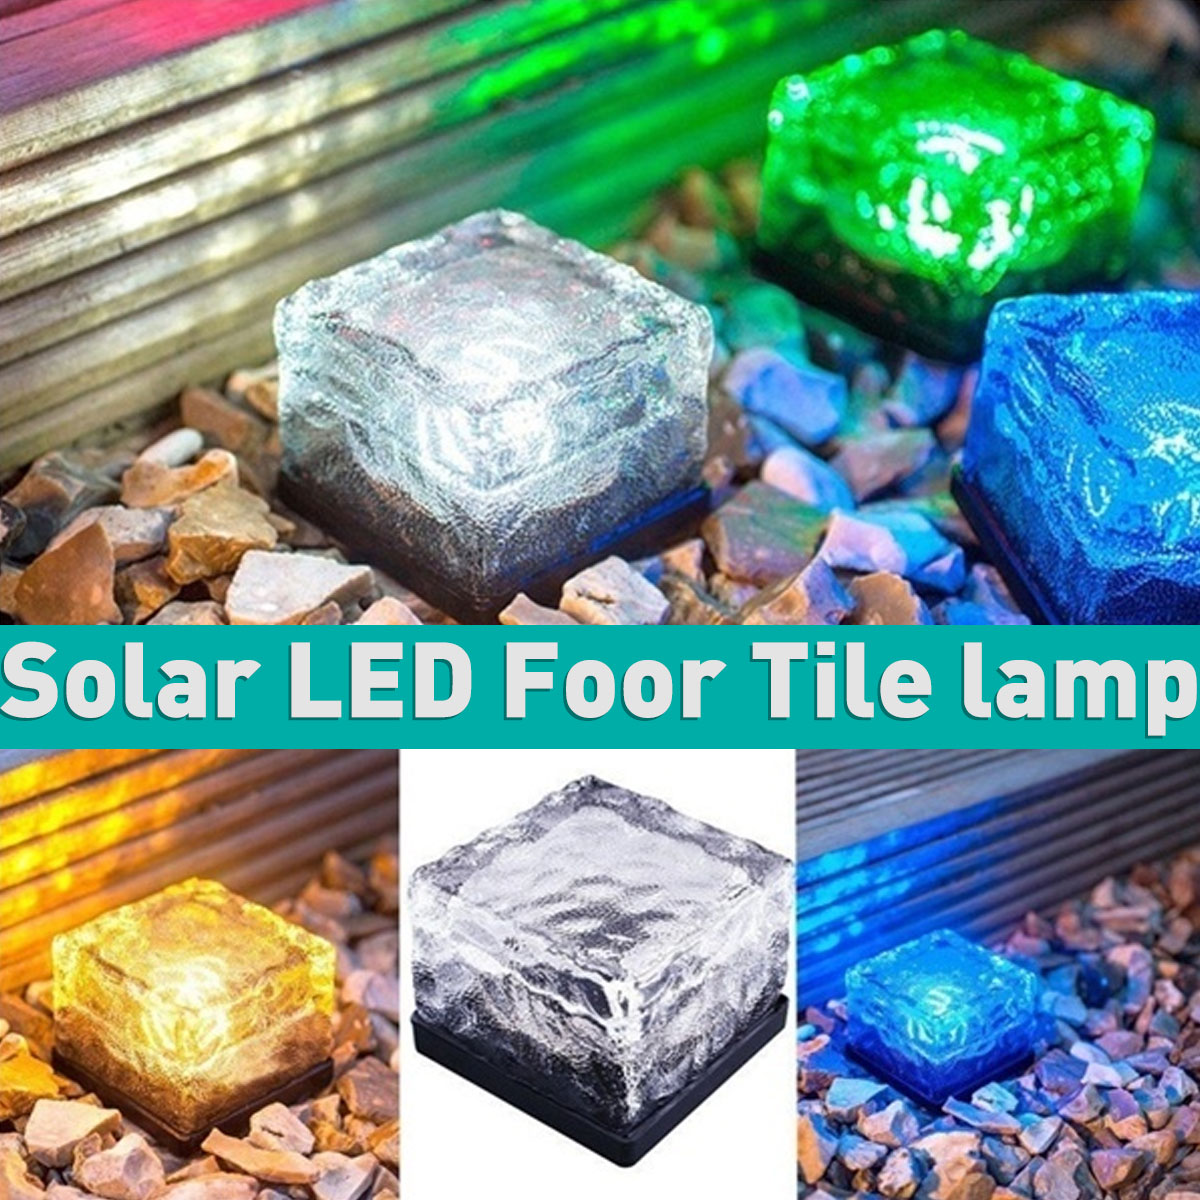 LED-Solar-Power-Buried-Light-Waterproof-Ice-Cube-Ground-Lawn-Lamp-Outdoor-Path-Garden-Deck-Lighting-1730821-1